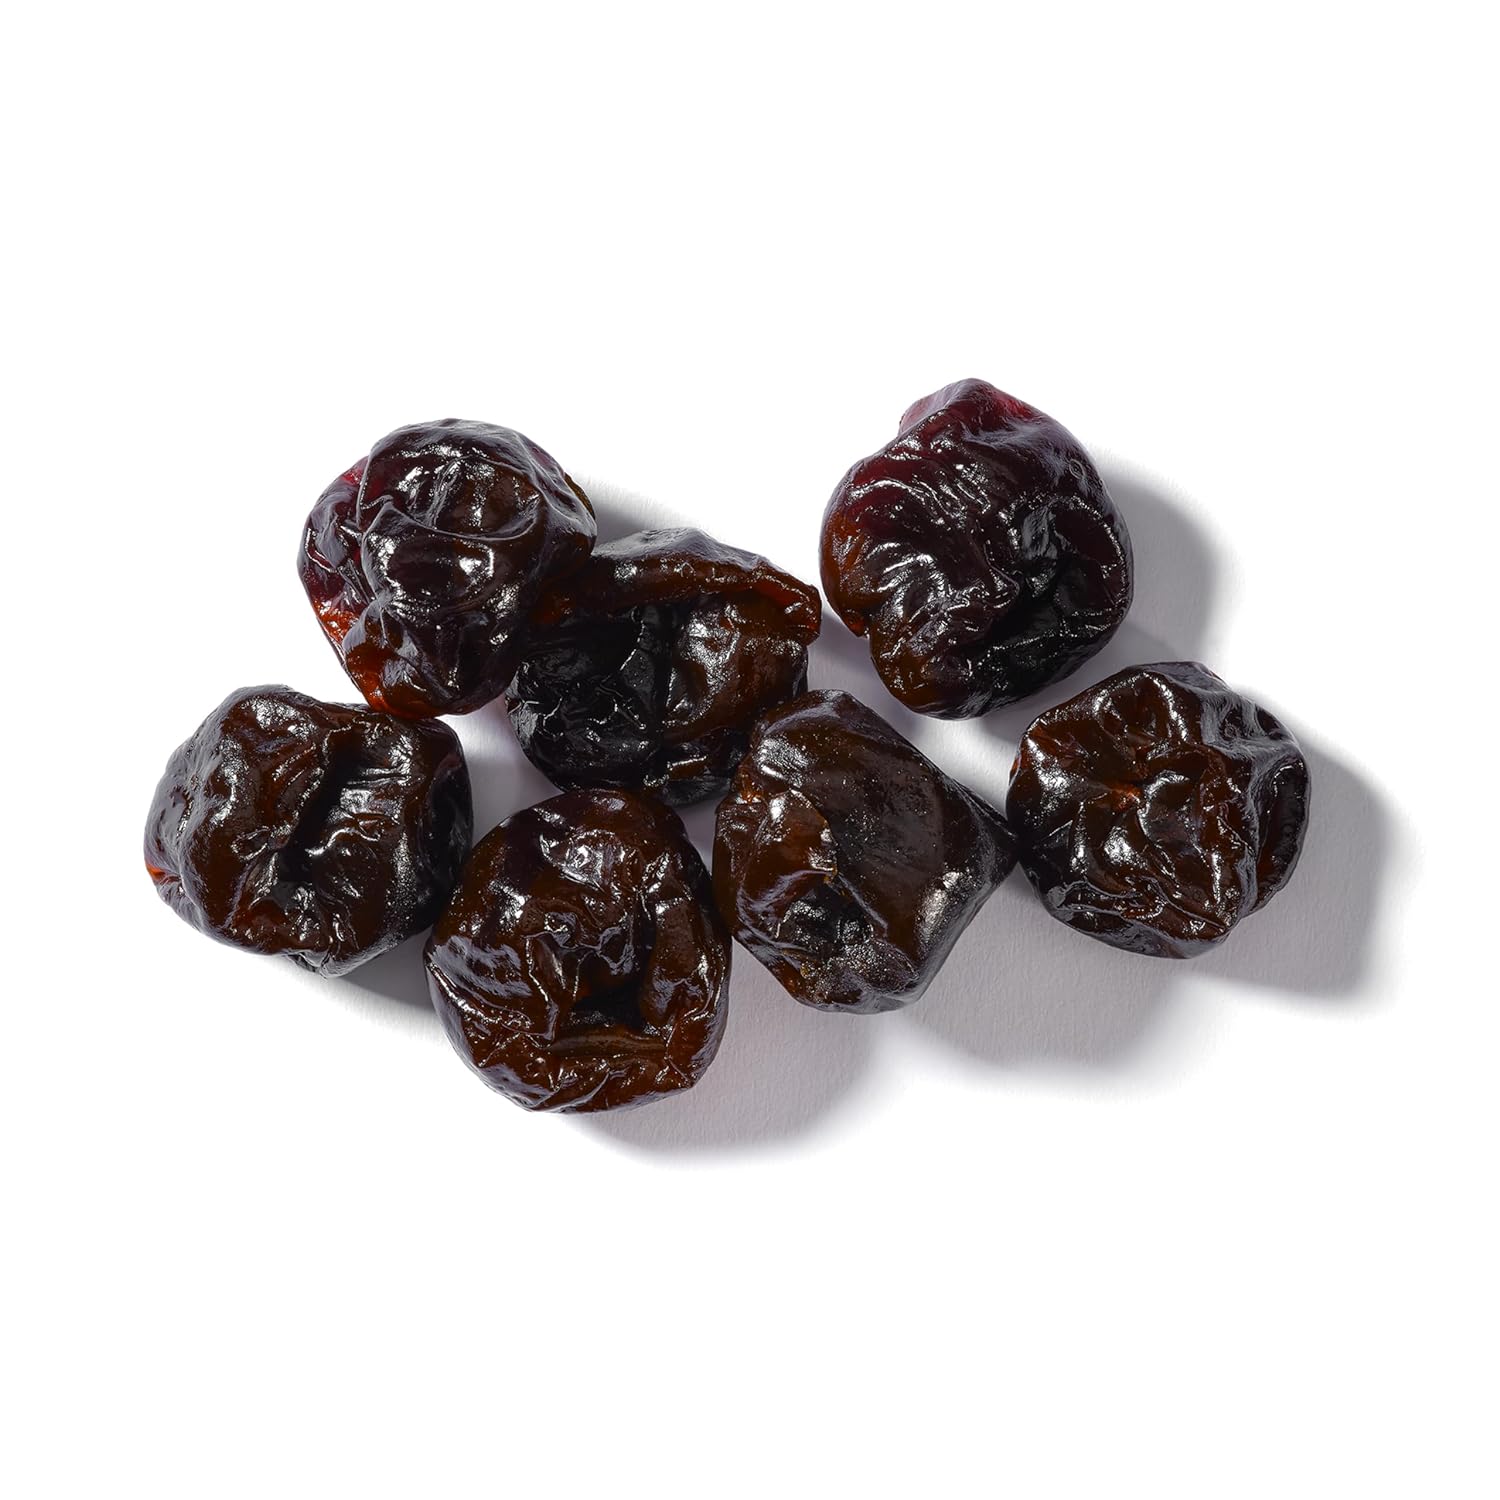 Yupik Dried Pitted Montmorency Cherries, Dried Fruit, 2.2lb, Pack of 1